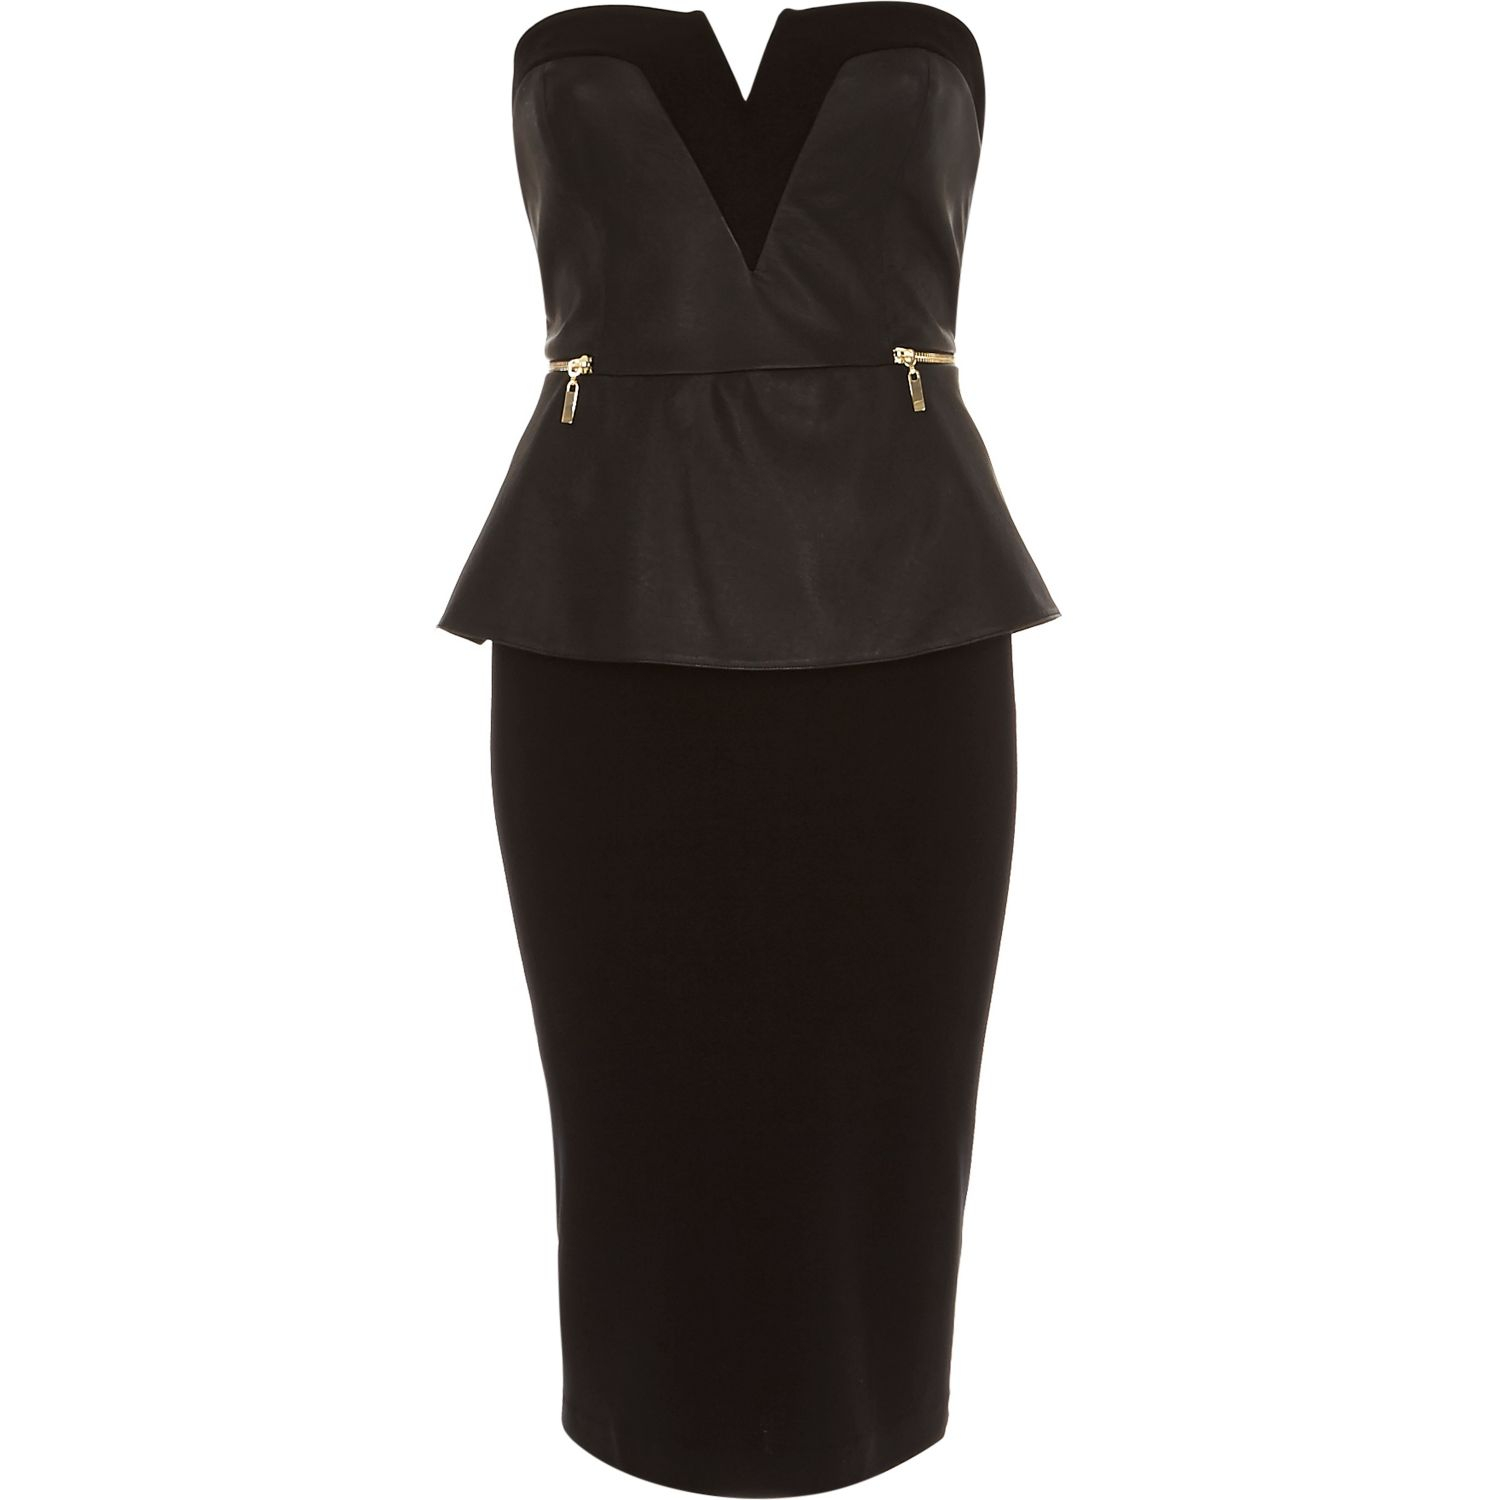 River Island Bandeau Dress : Always In Fashion For All Occasions